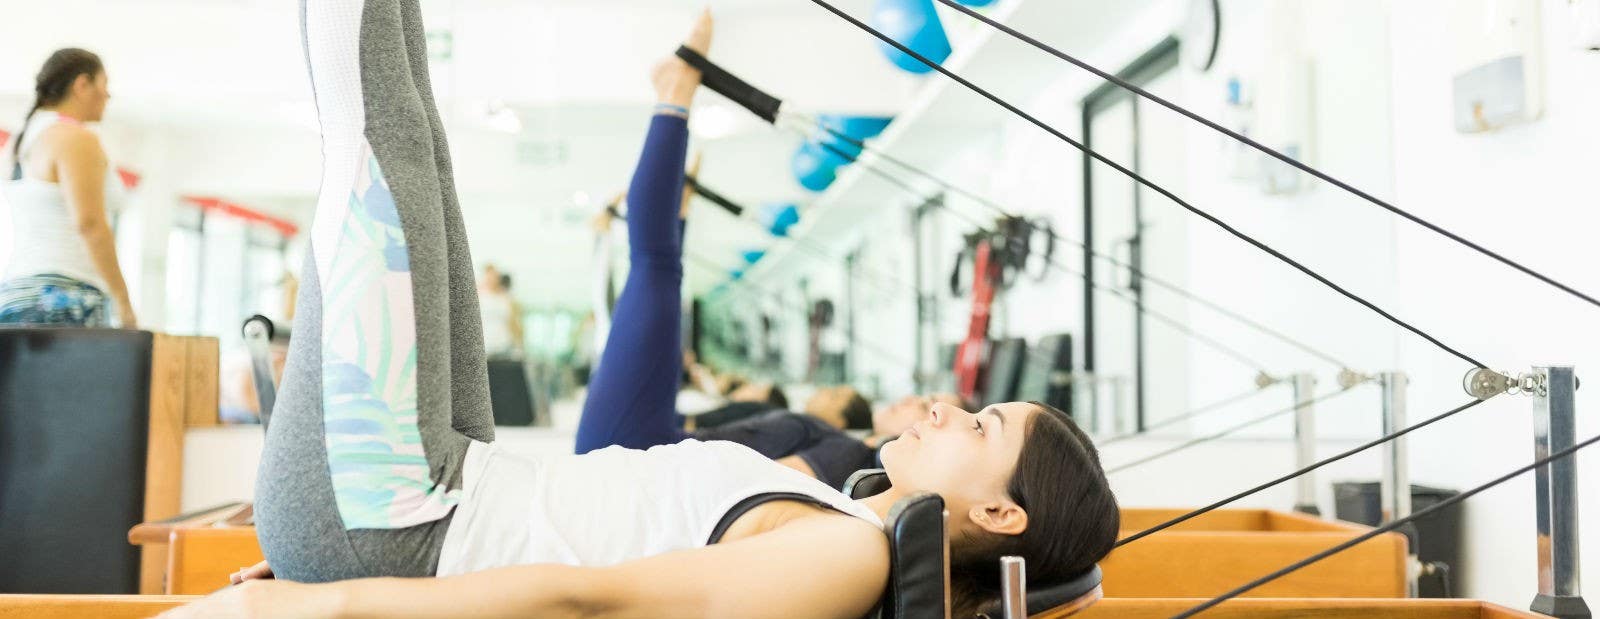 All You Need To Know About Pilates Workout For Beginners